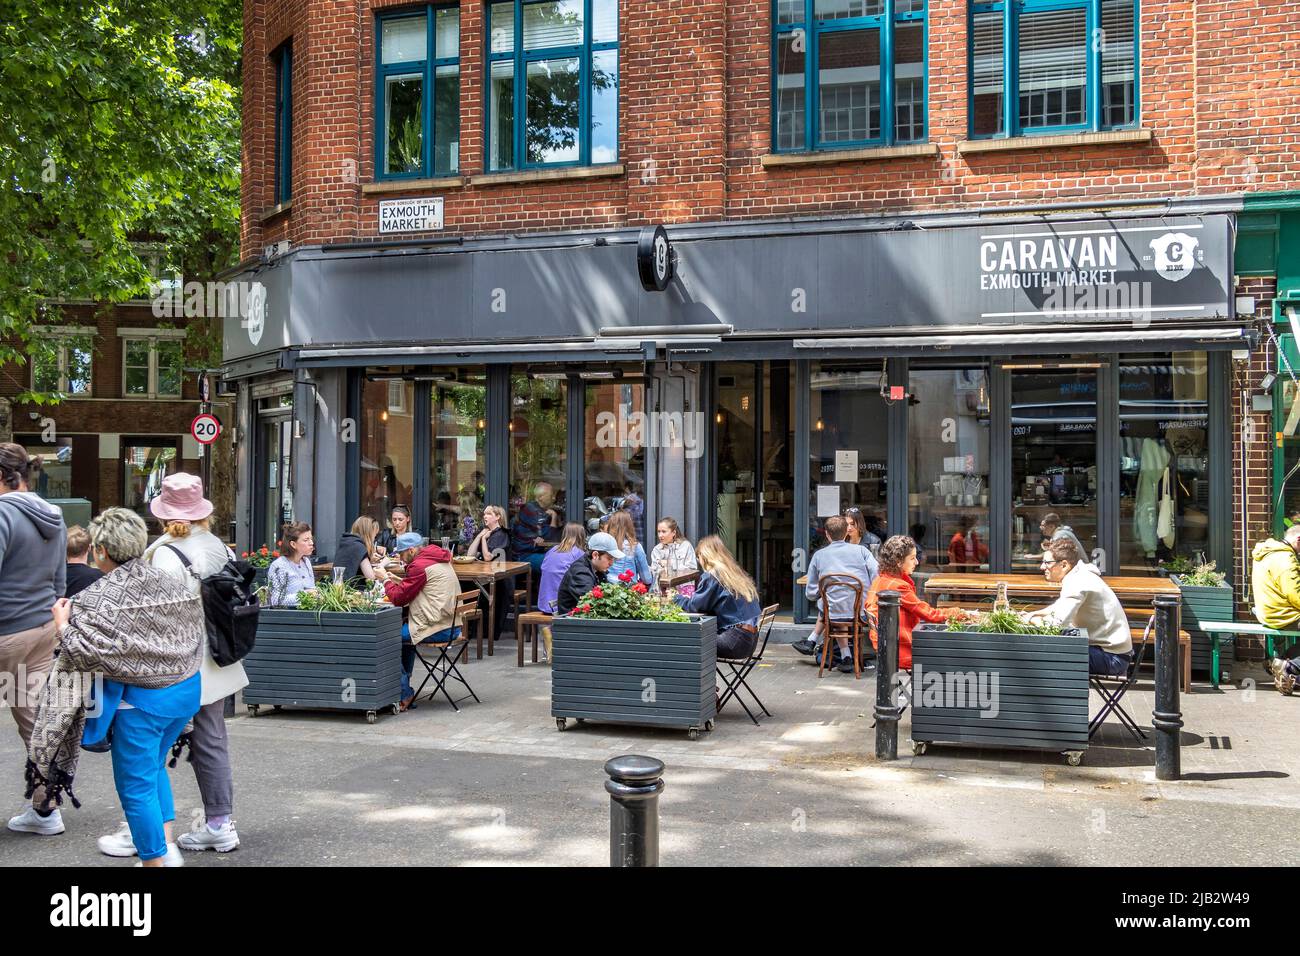 People sitting outside Caravan a coffee shop,  restaurant and bar located on Exmouth Market, Clerkenwell ,London EC1 Stock Photo